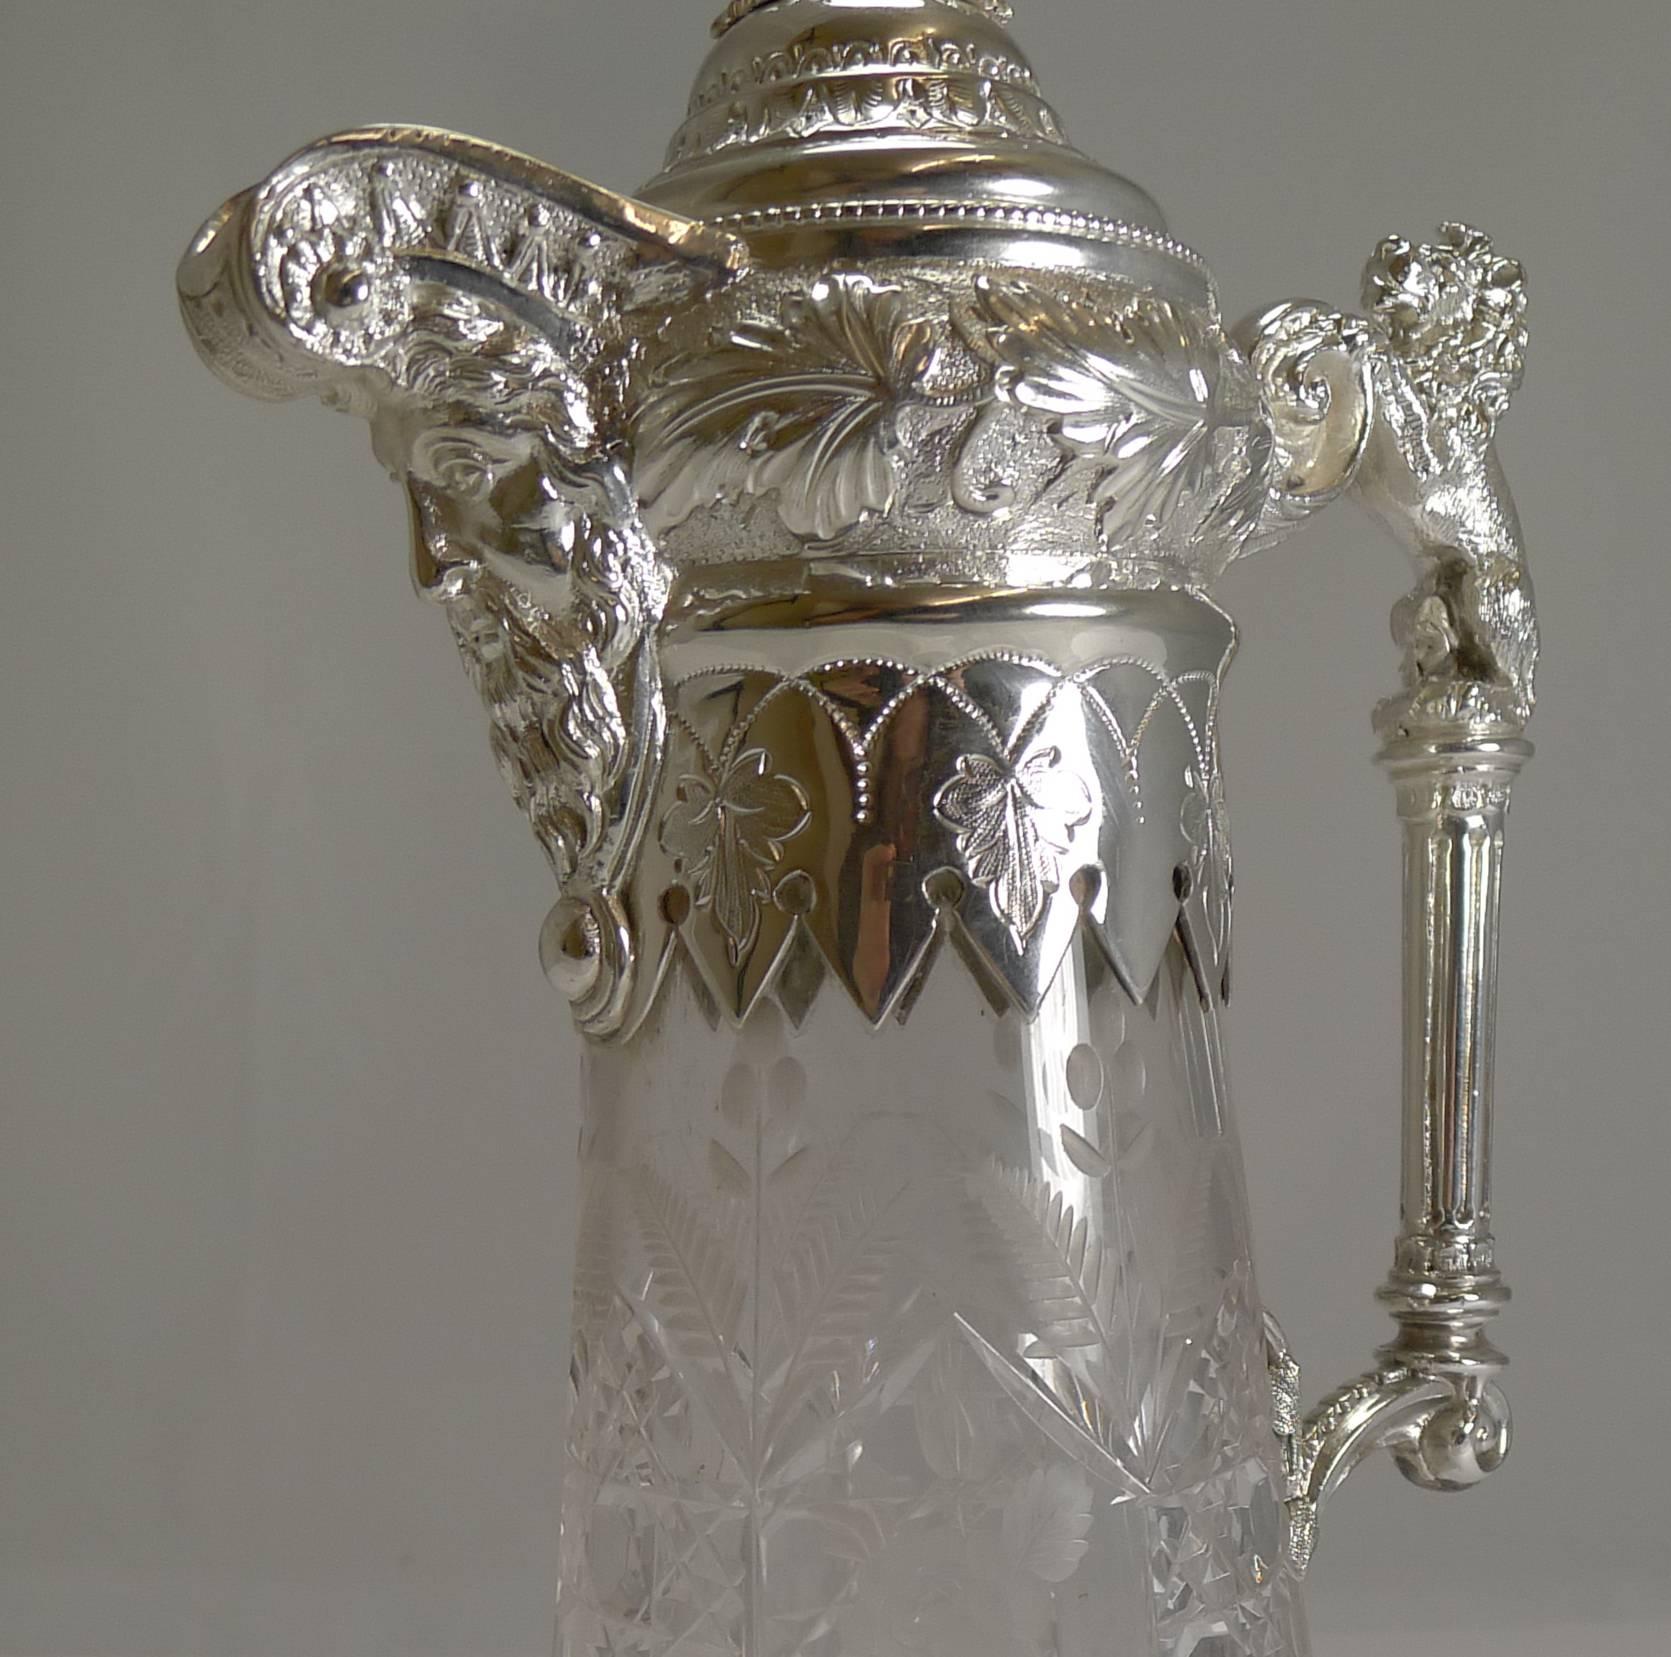 A fabulous and highly decorative Claret jug, made from English crystal with alternate panels of wheel engraved floral and folate vignettes and deep hobnail cut panels.

The silver plated fittings are a joy, very grand looking with the top of the